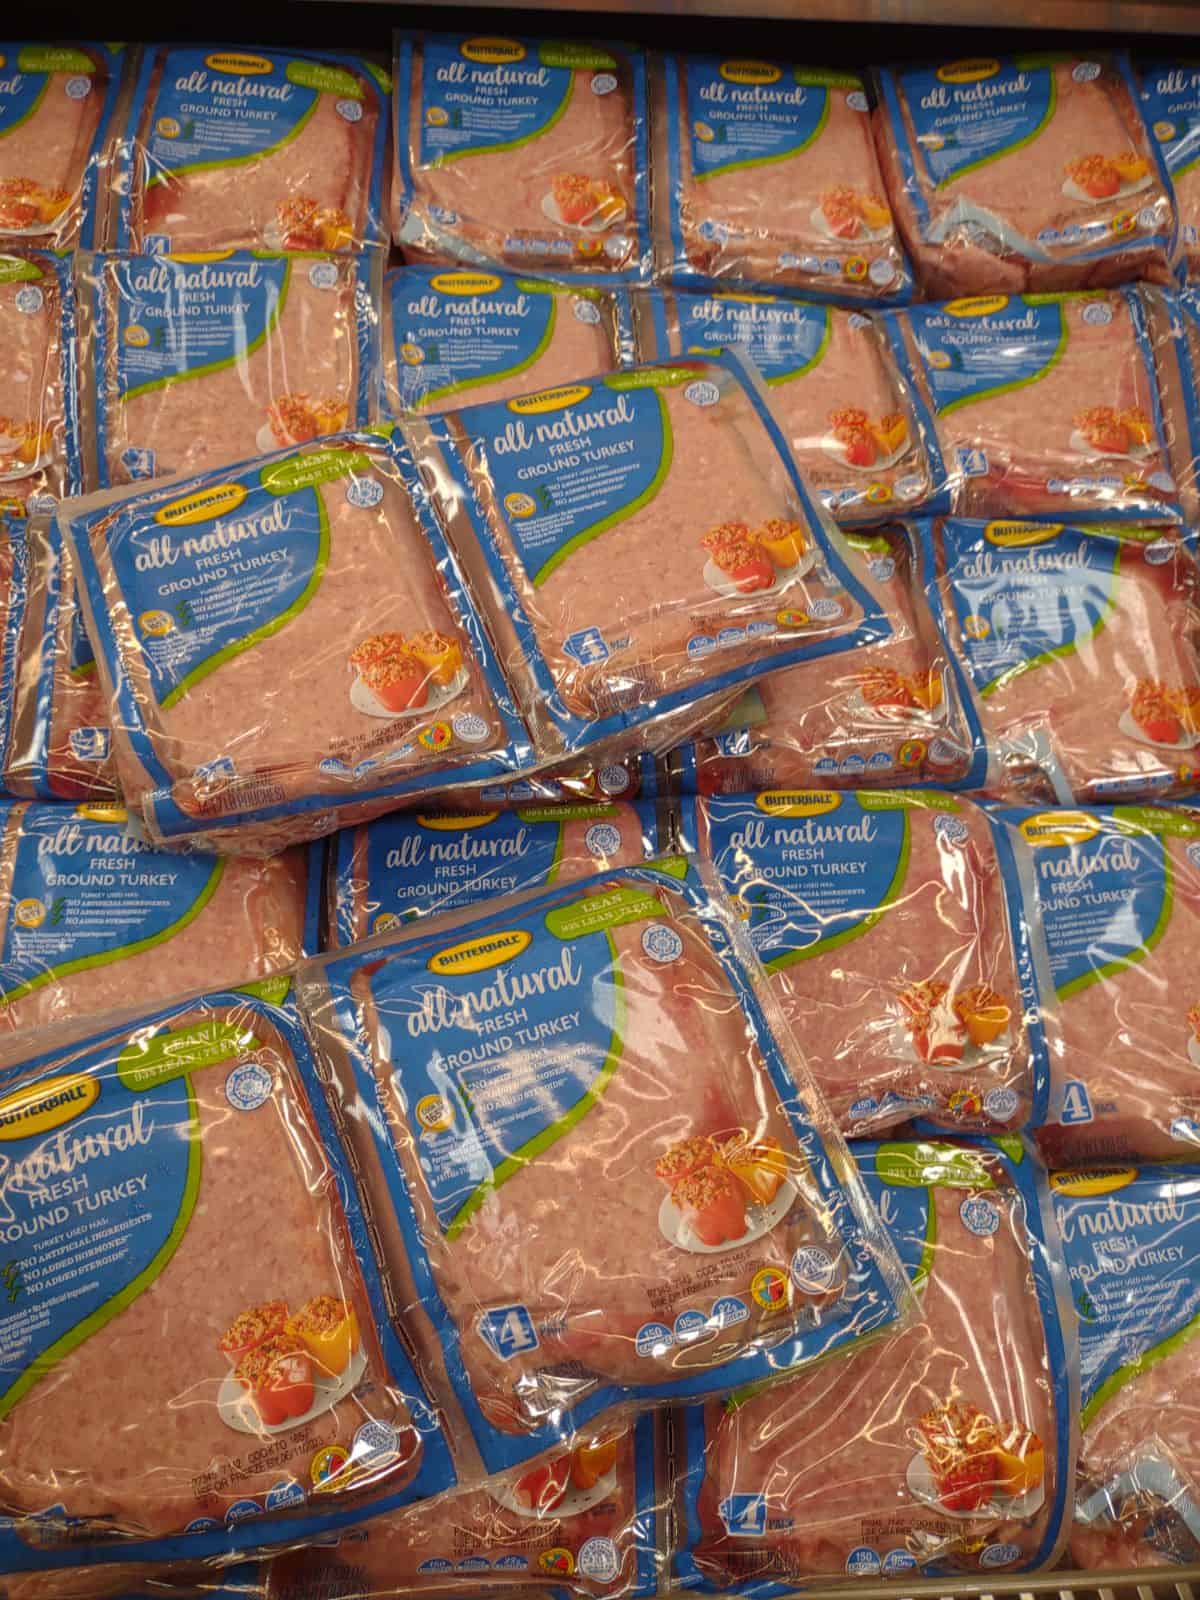 Packages of Butterball All natural Fresh Ground turkey